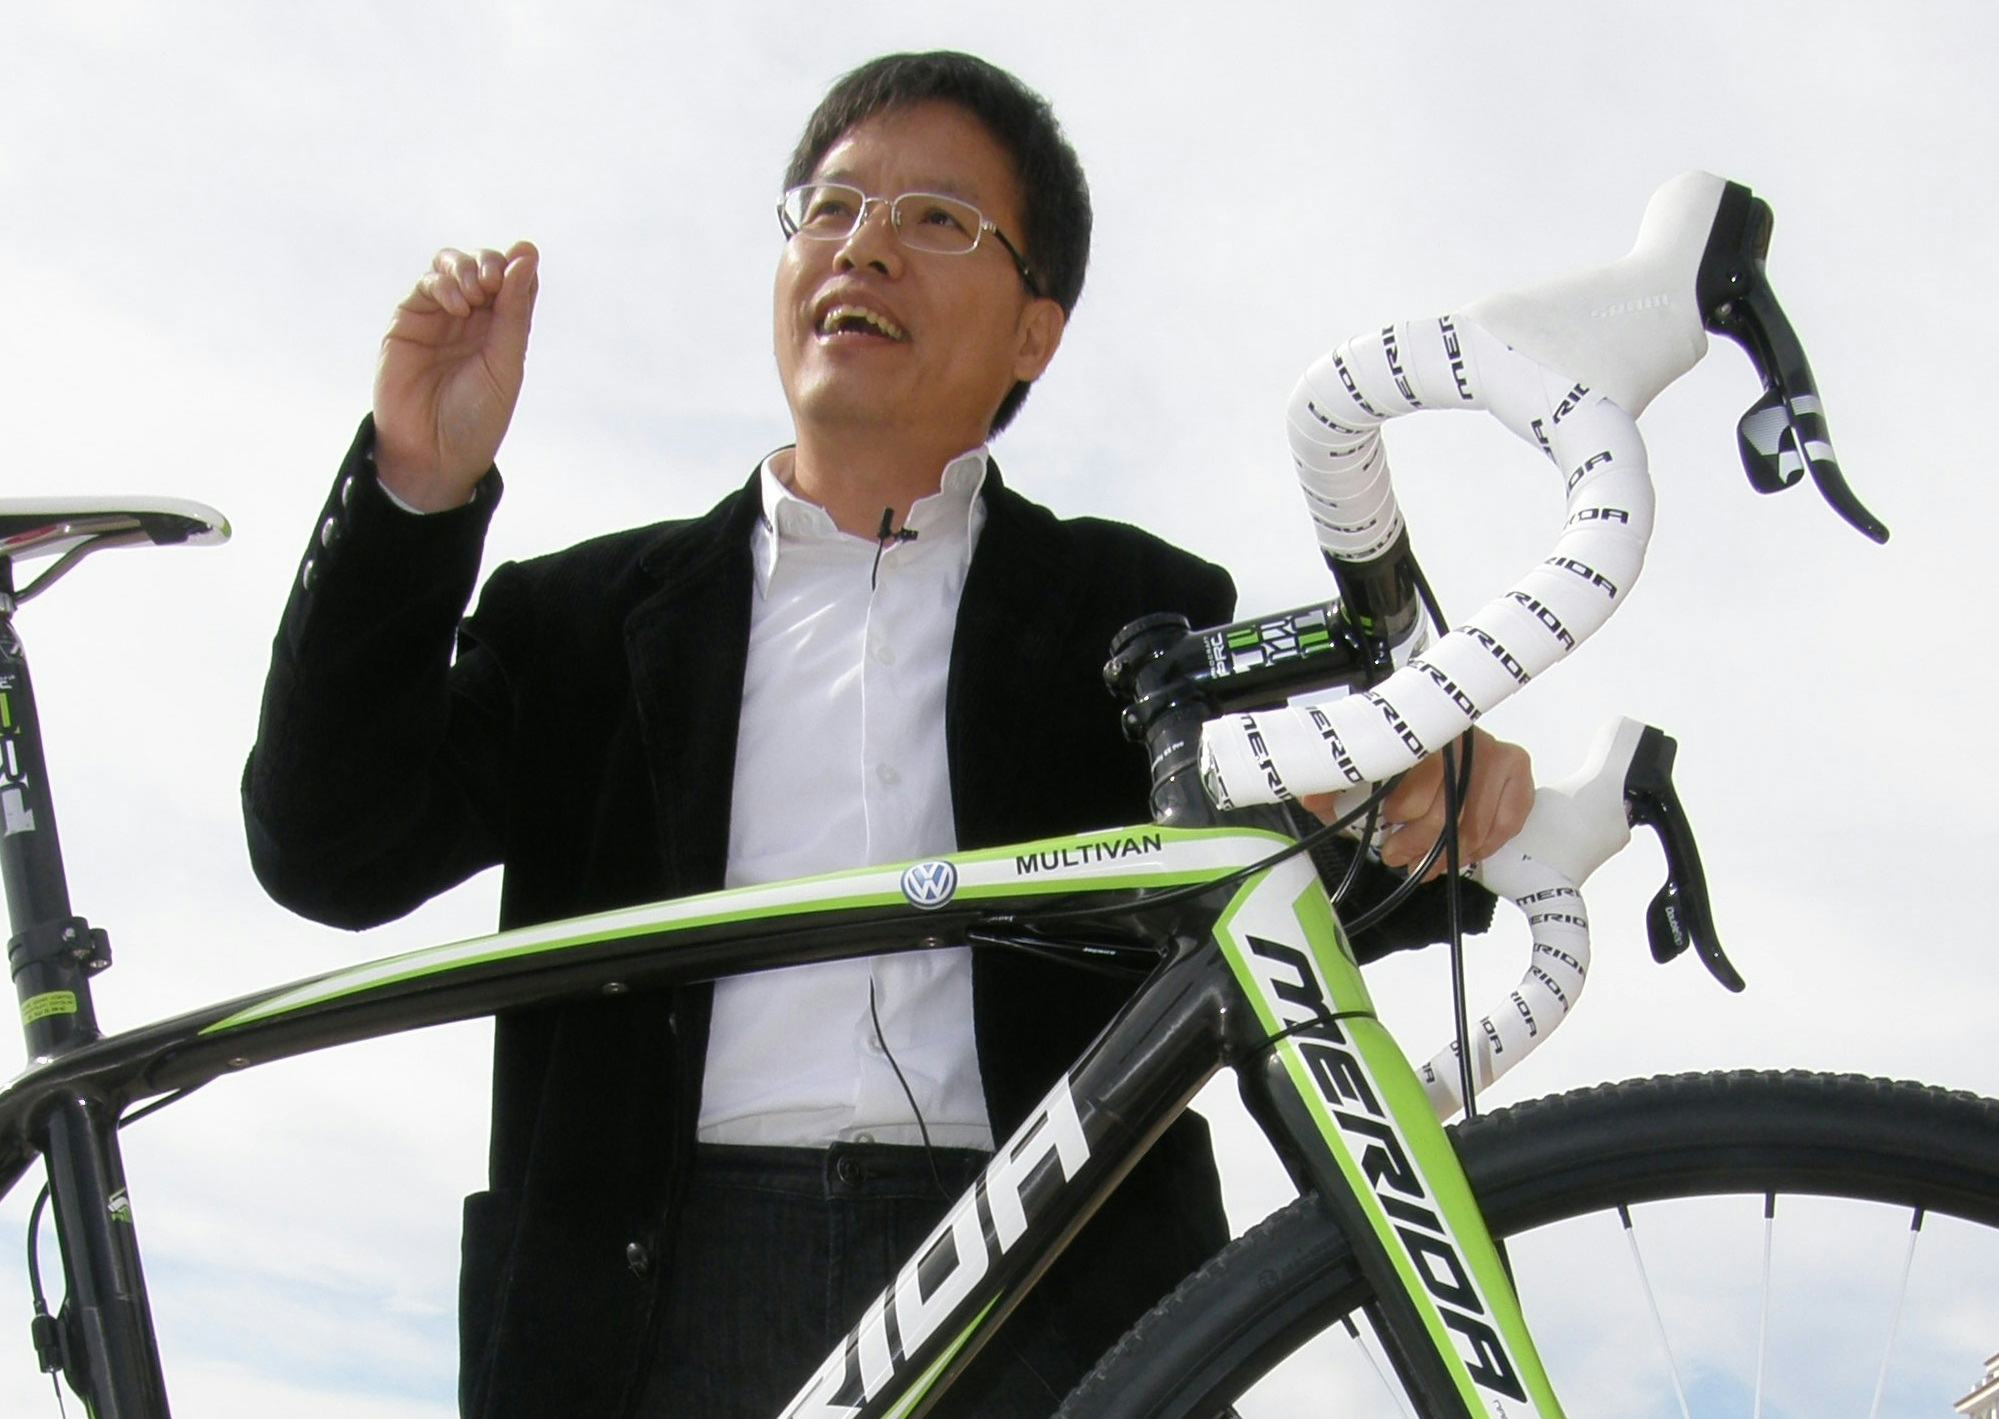 “Merida has shown great progress over the years by constantly pushing the envelope of what is technically possible,” says William Jeng, Senior Vice President Merida. – Photo Bike Europe